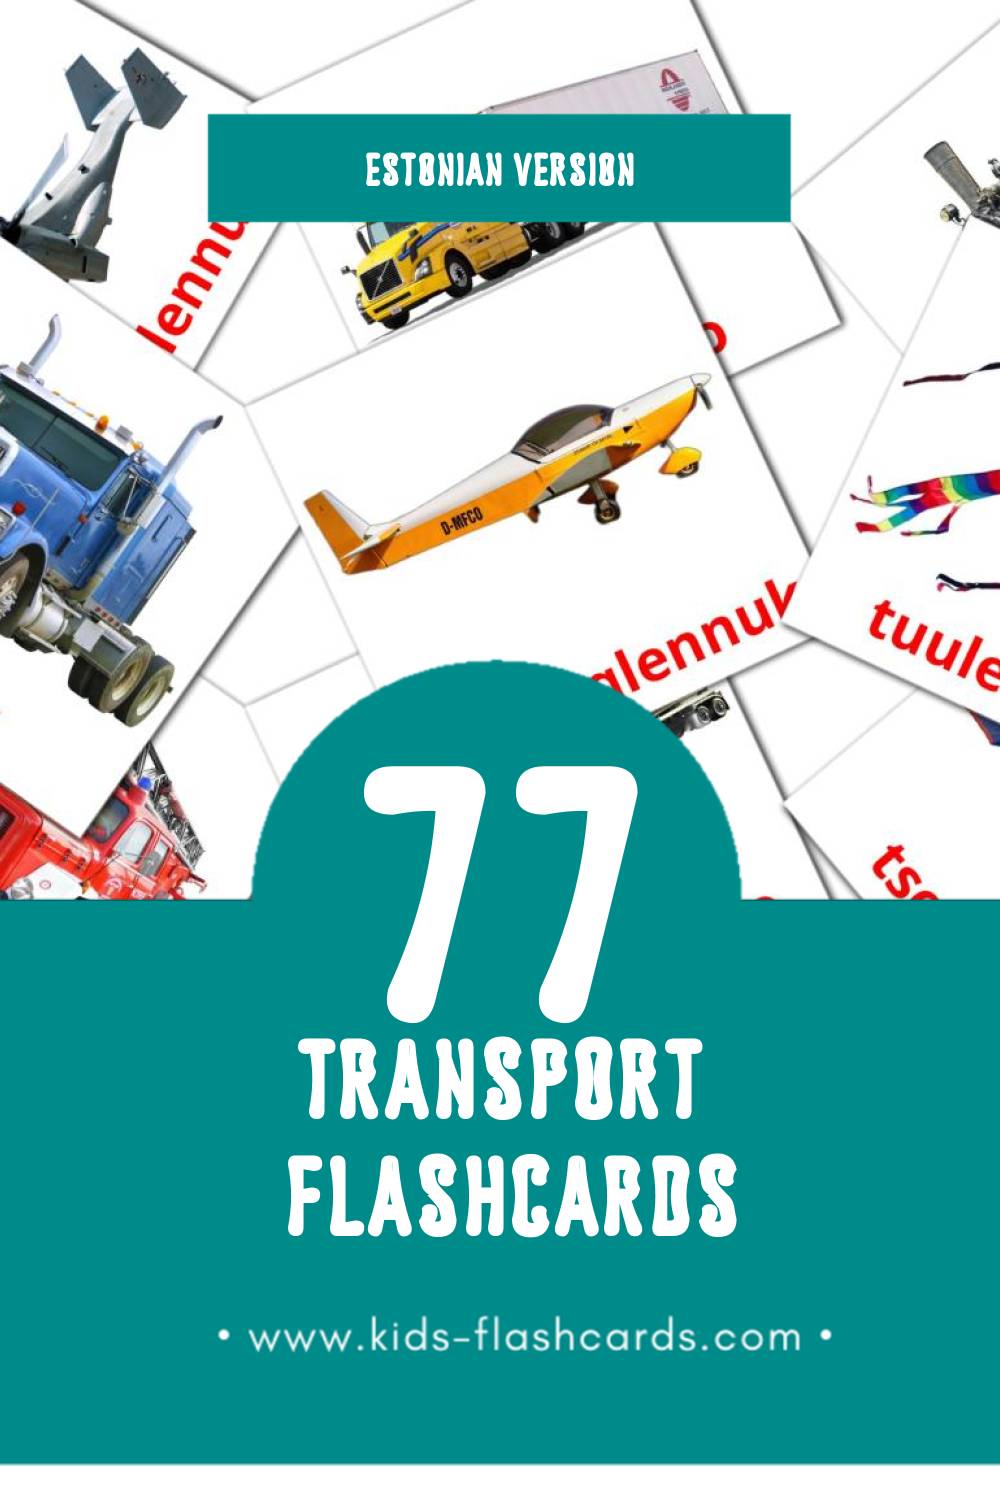 Visual Transport Flashcards for Toddlers (60 cards in Estonian)